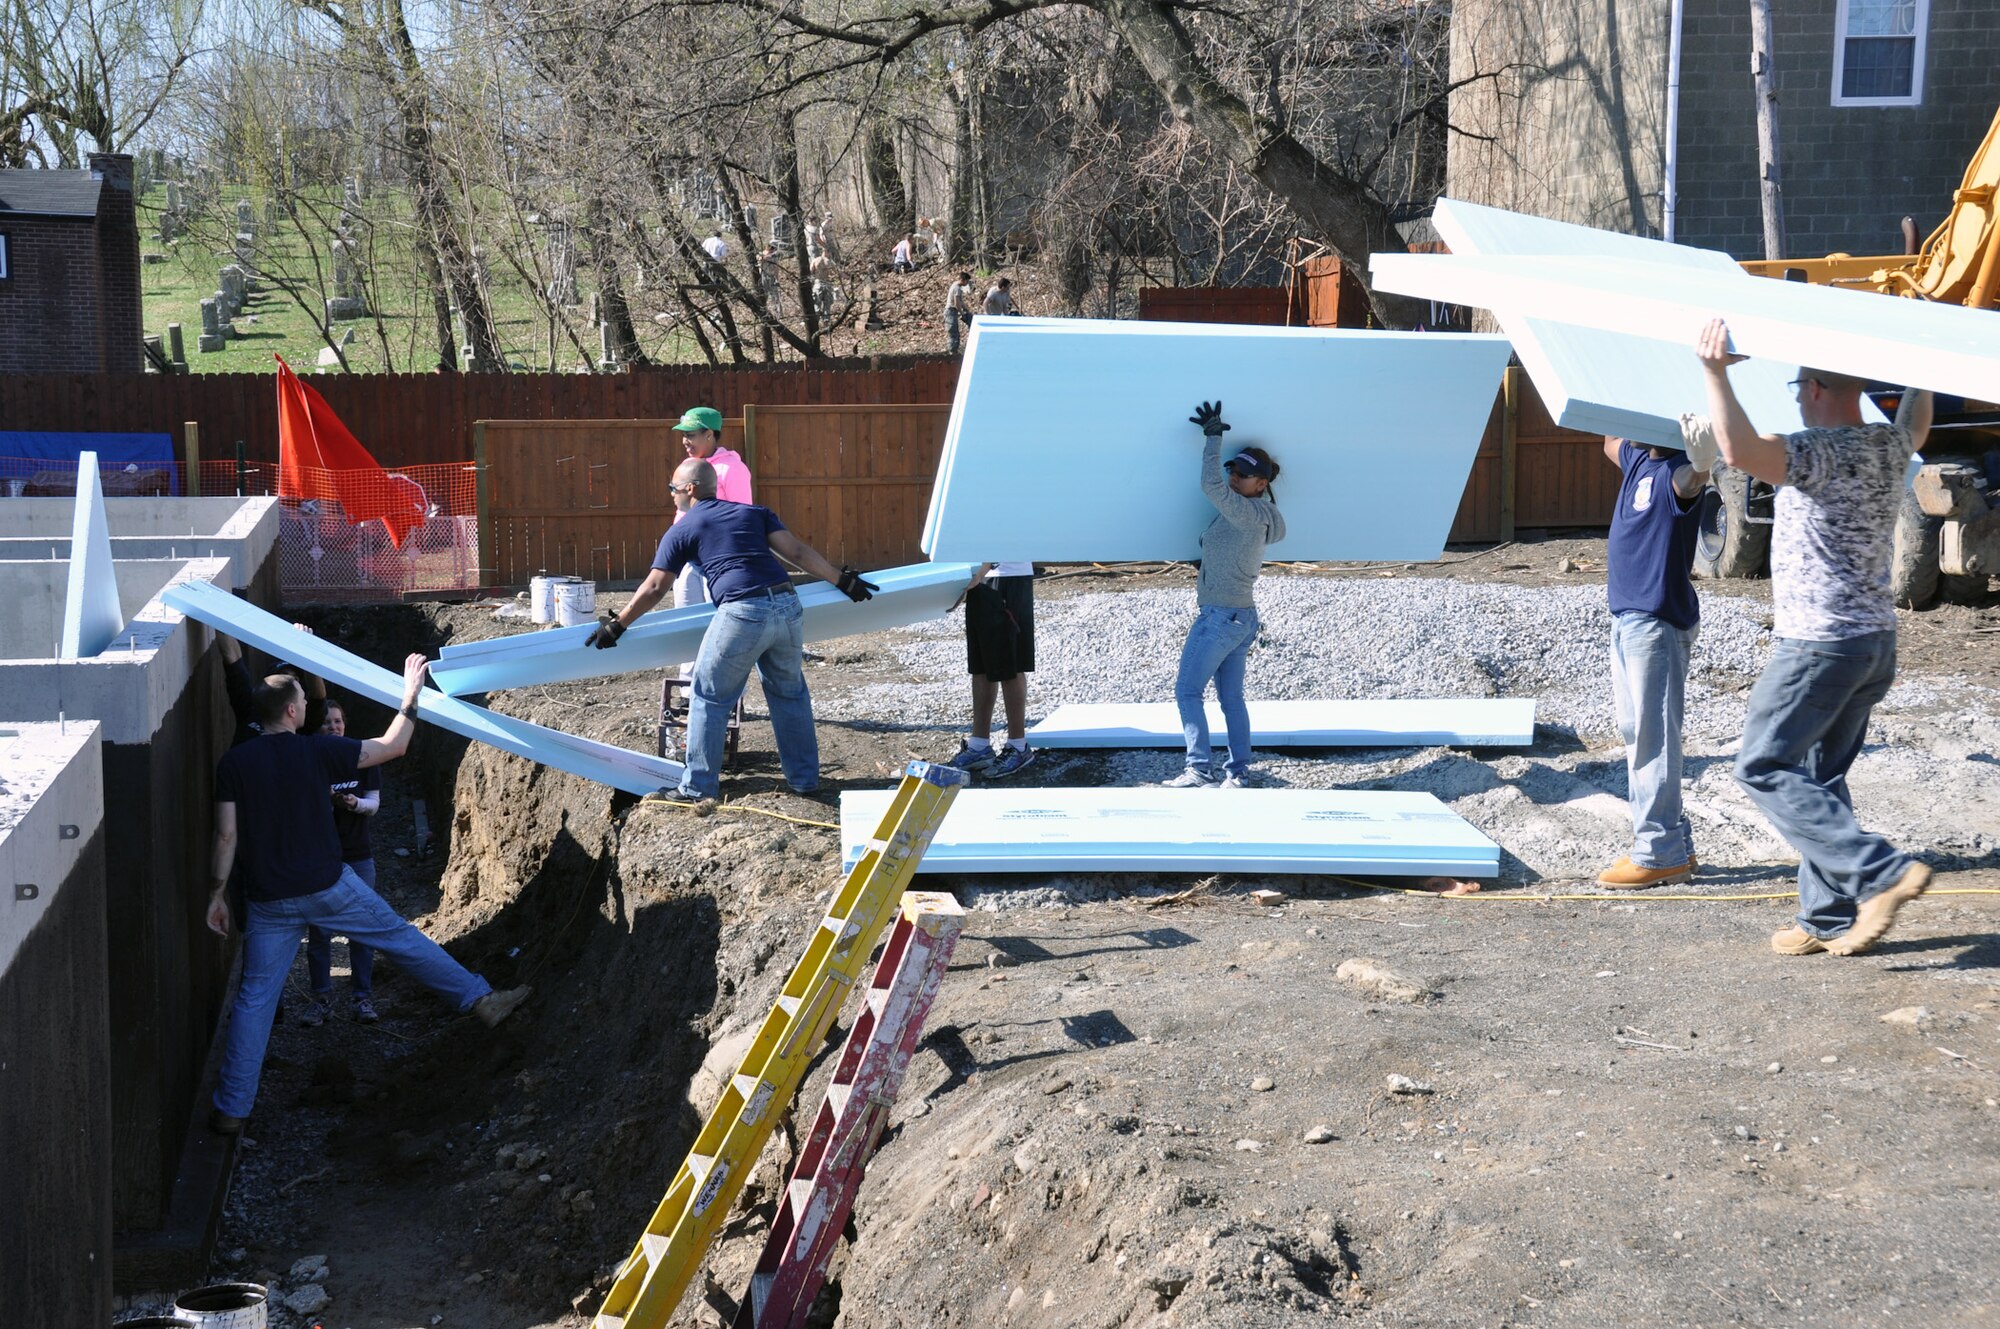 Members of the New York Air National Guard's 105th Airlift Wing and Boeing Company use their off-duty time to install insulated panels on a house being built by Habitat for Humanity in Newburgh, N.Y., Saturday, April 18, 2015. The Airmen are members of the Wing's First Six Council, a group for junior Airmen. (U.S. Air National Guard photo by Maj. Patrick Cordova/Released)